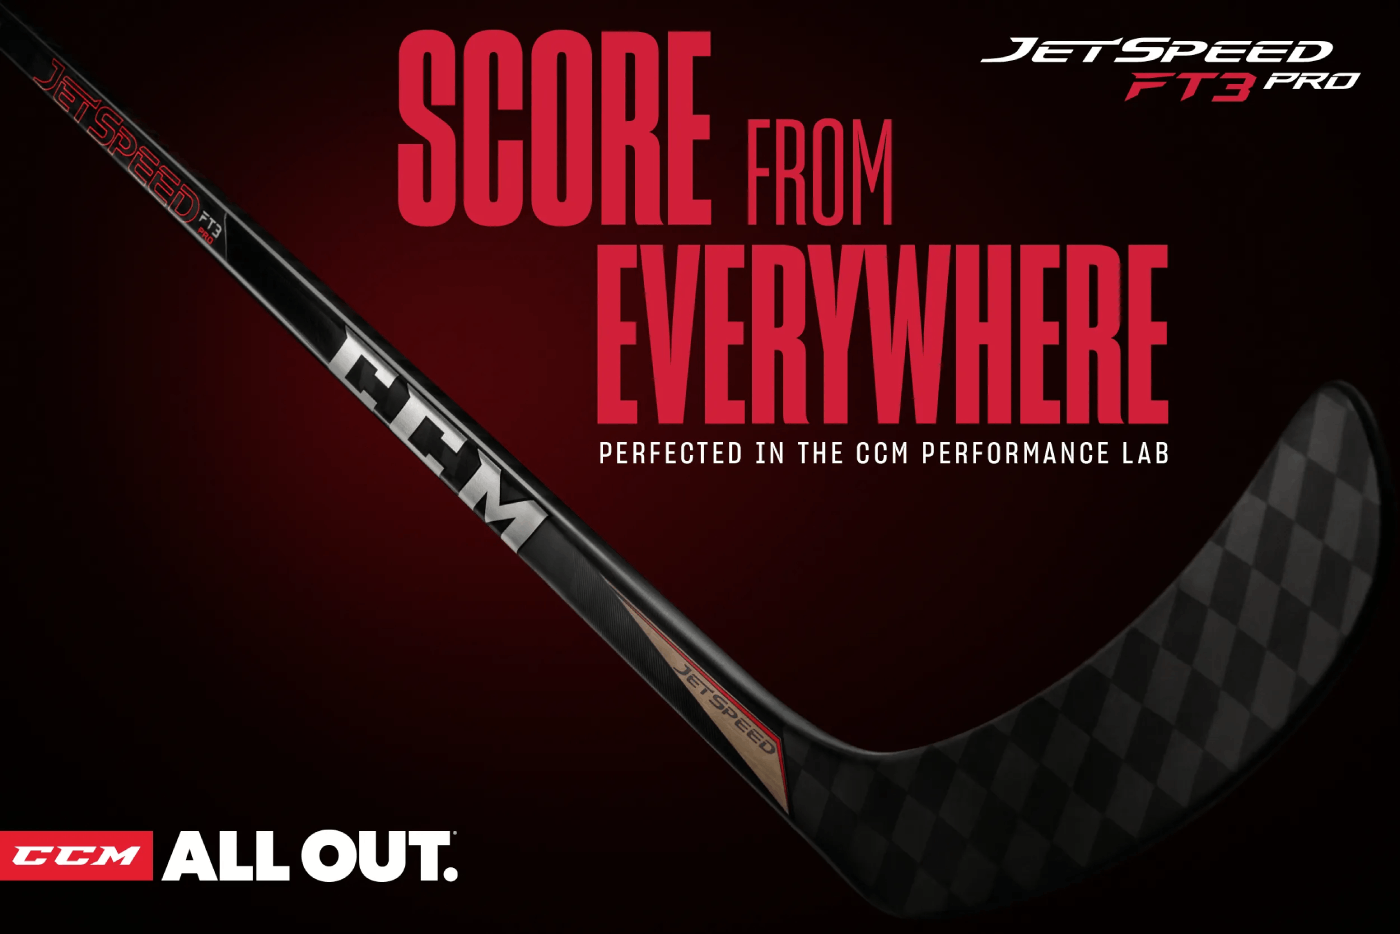 ccm jetspeed ft3 pro stick banner score from everywhere